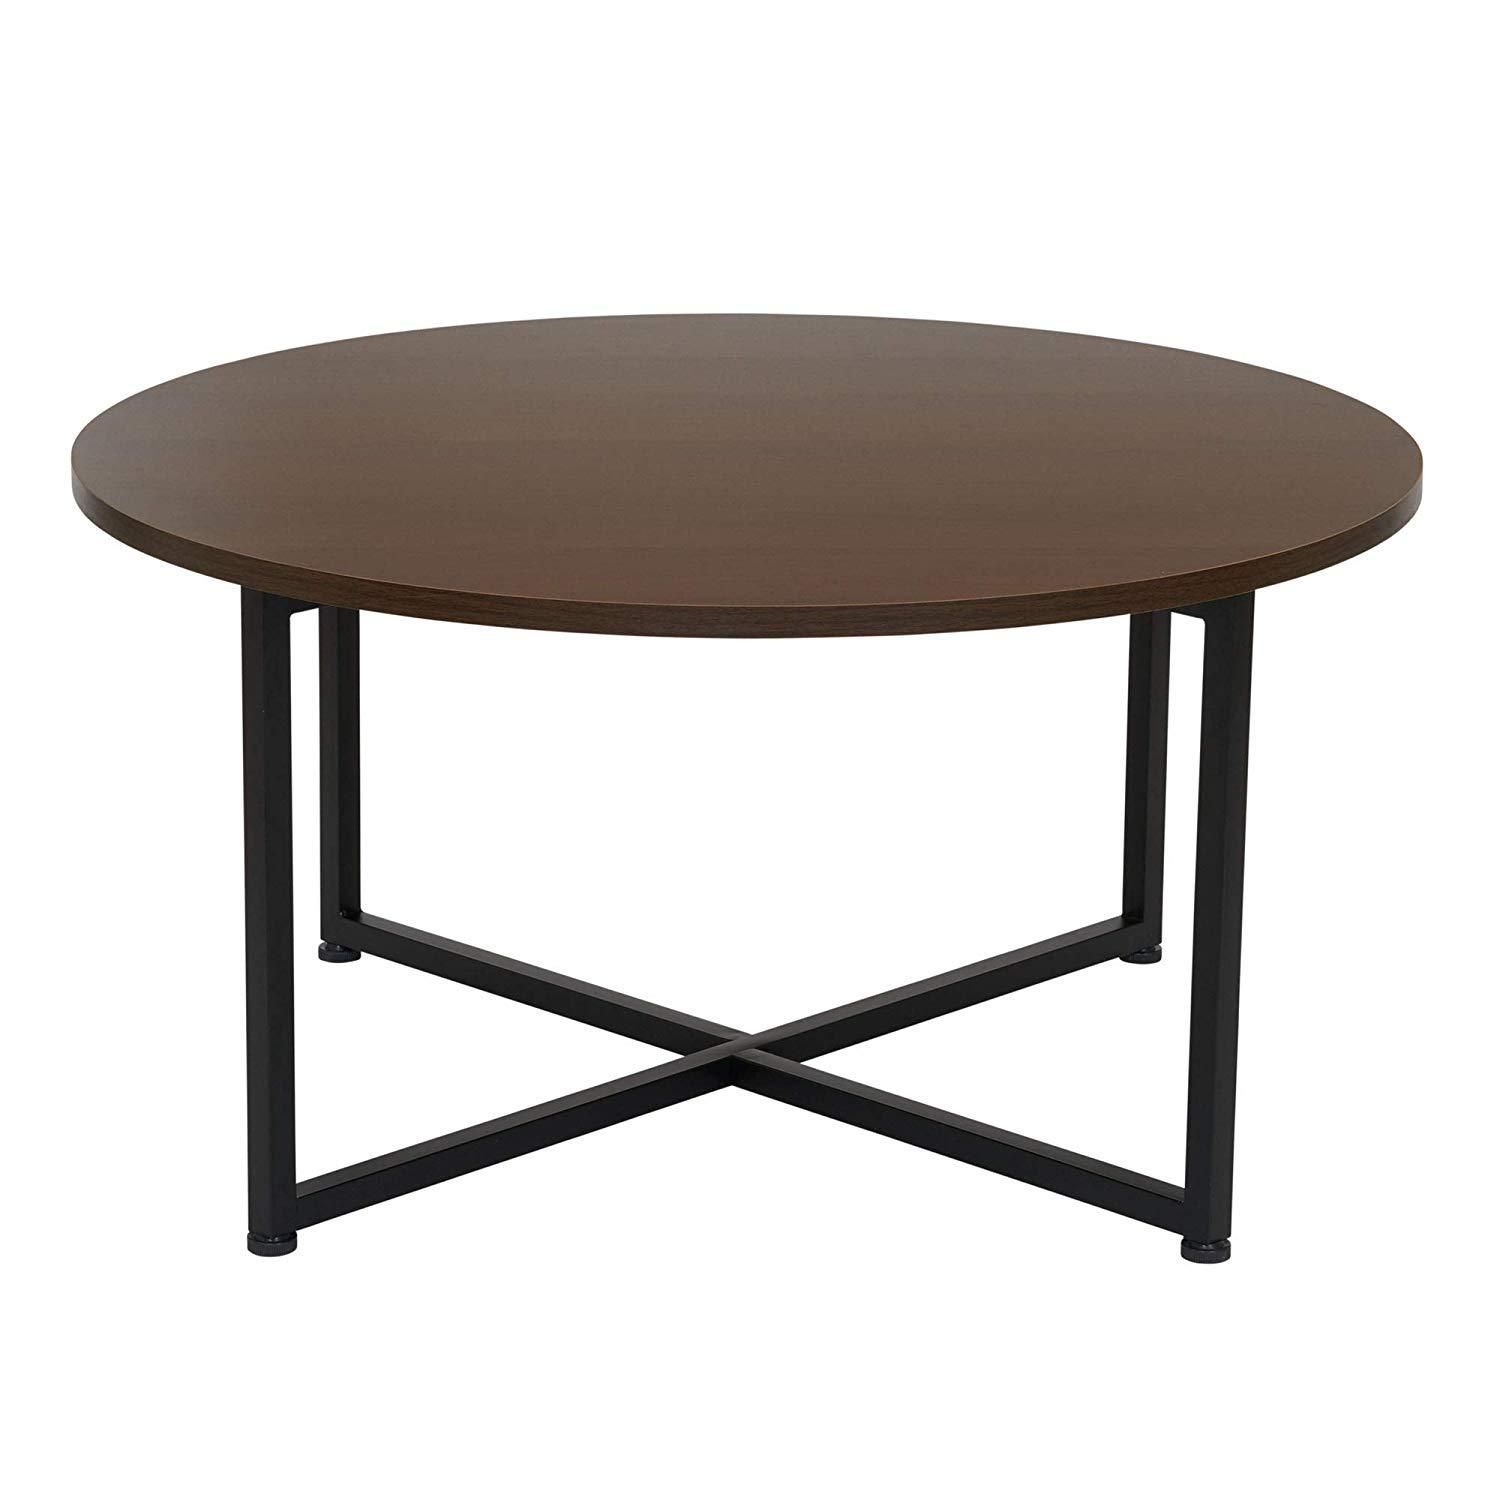 Round Coffee Table Wooden Metal Frame Living Room Furniture Home Office Regarding Round Coffee Tables With Steel Frames (Gallery 14 of 21)